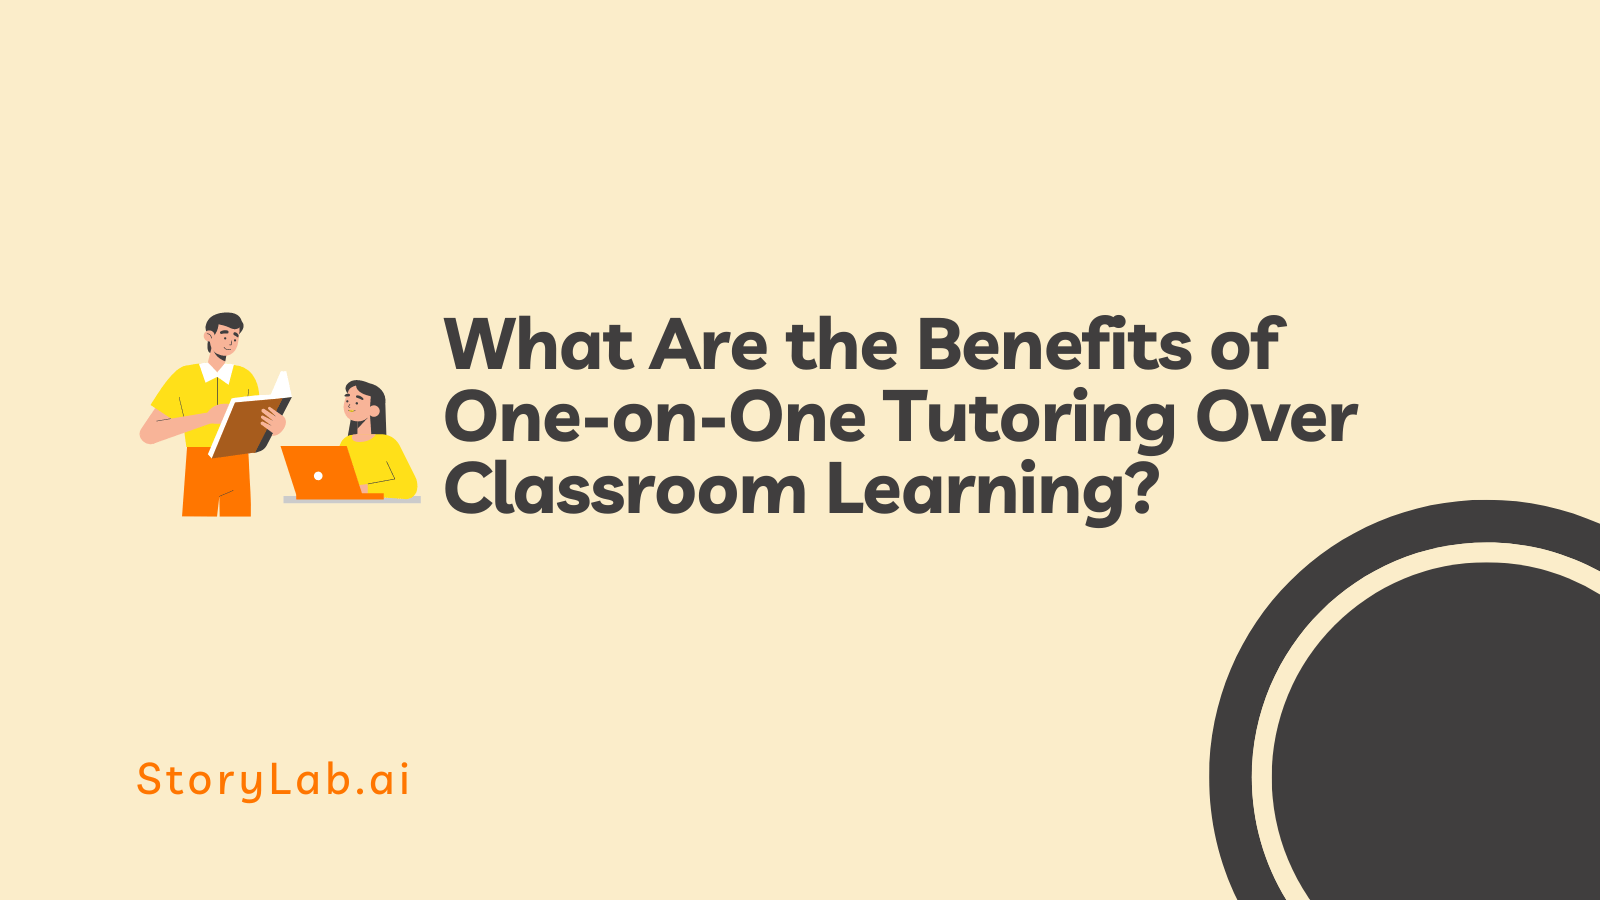 What Are the Benefits of One-on-One Tutoring Over Classroom Learning